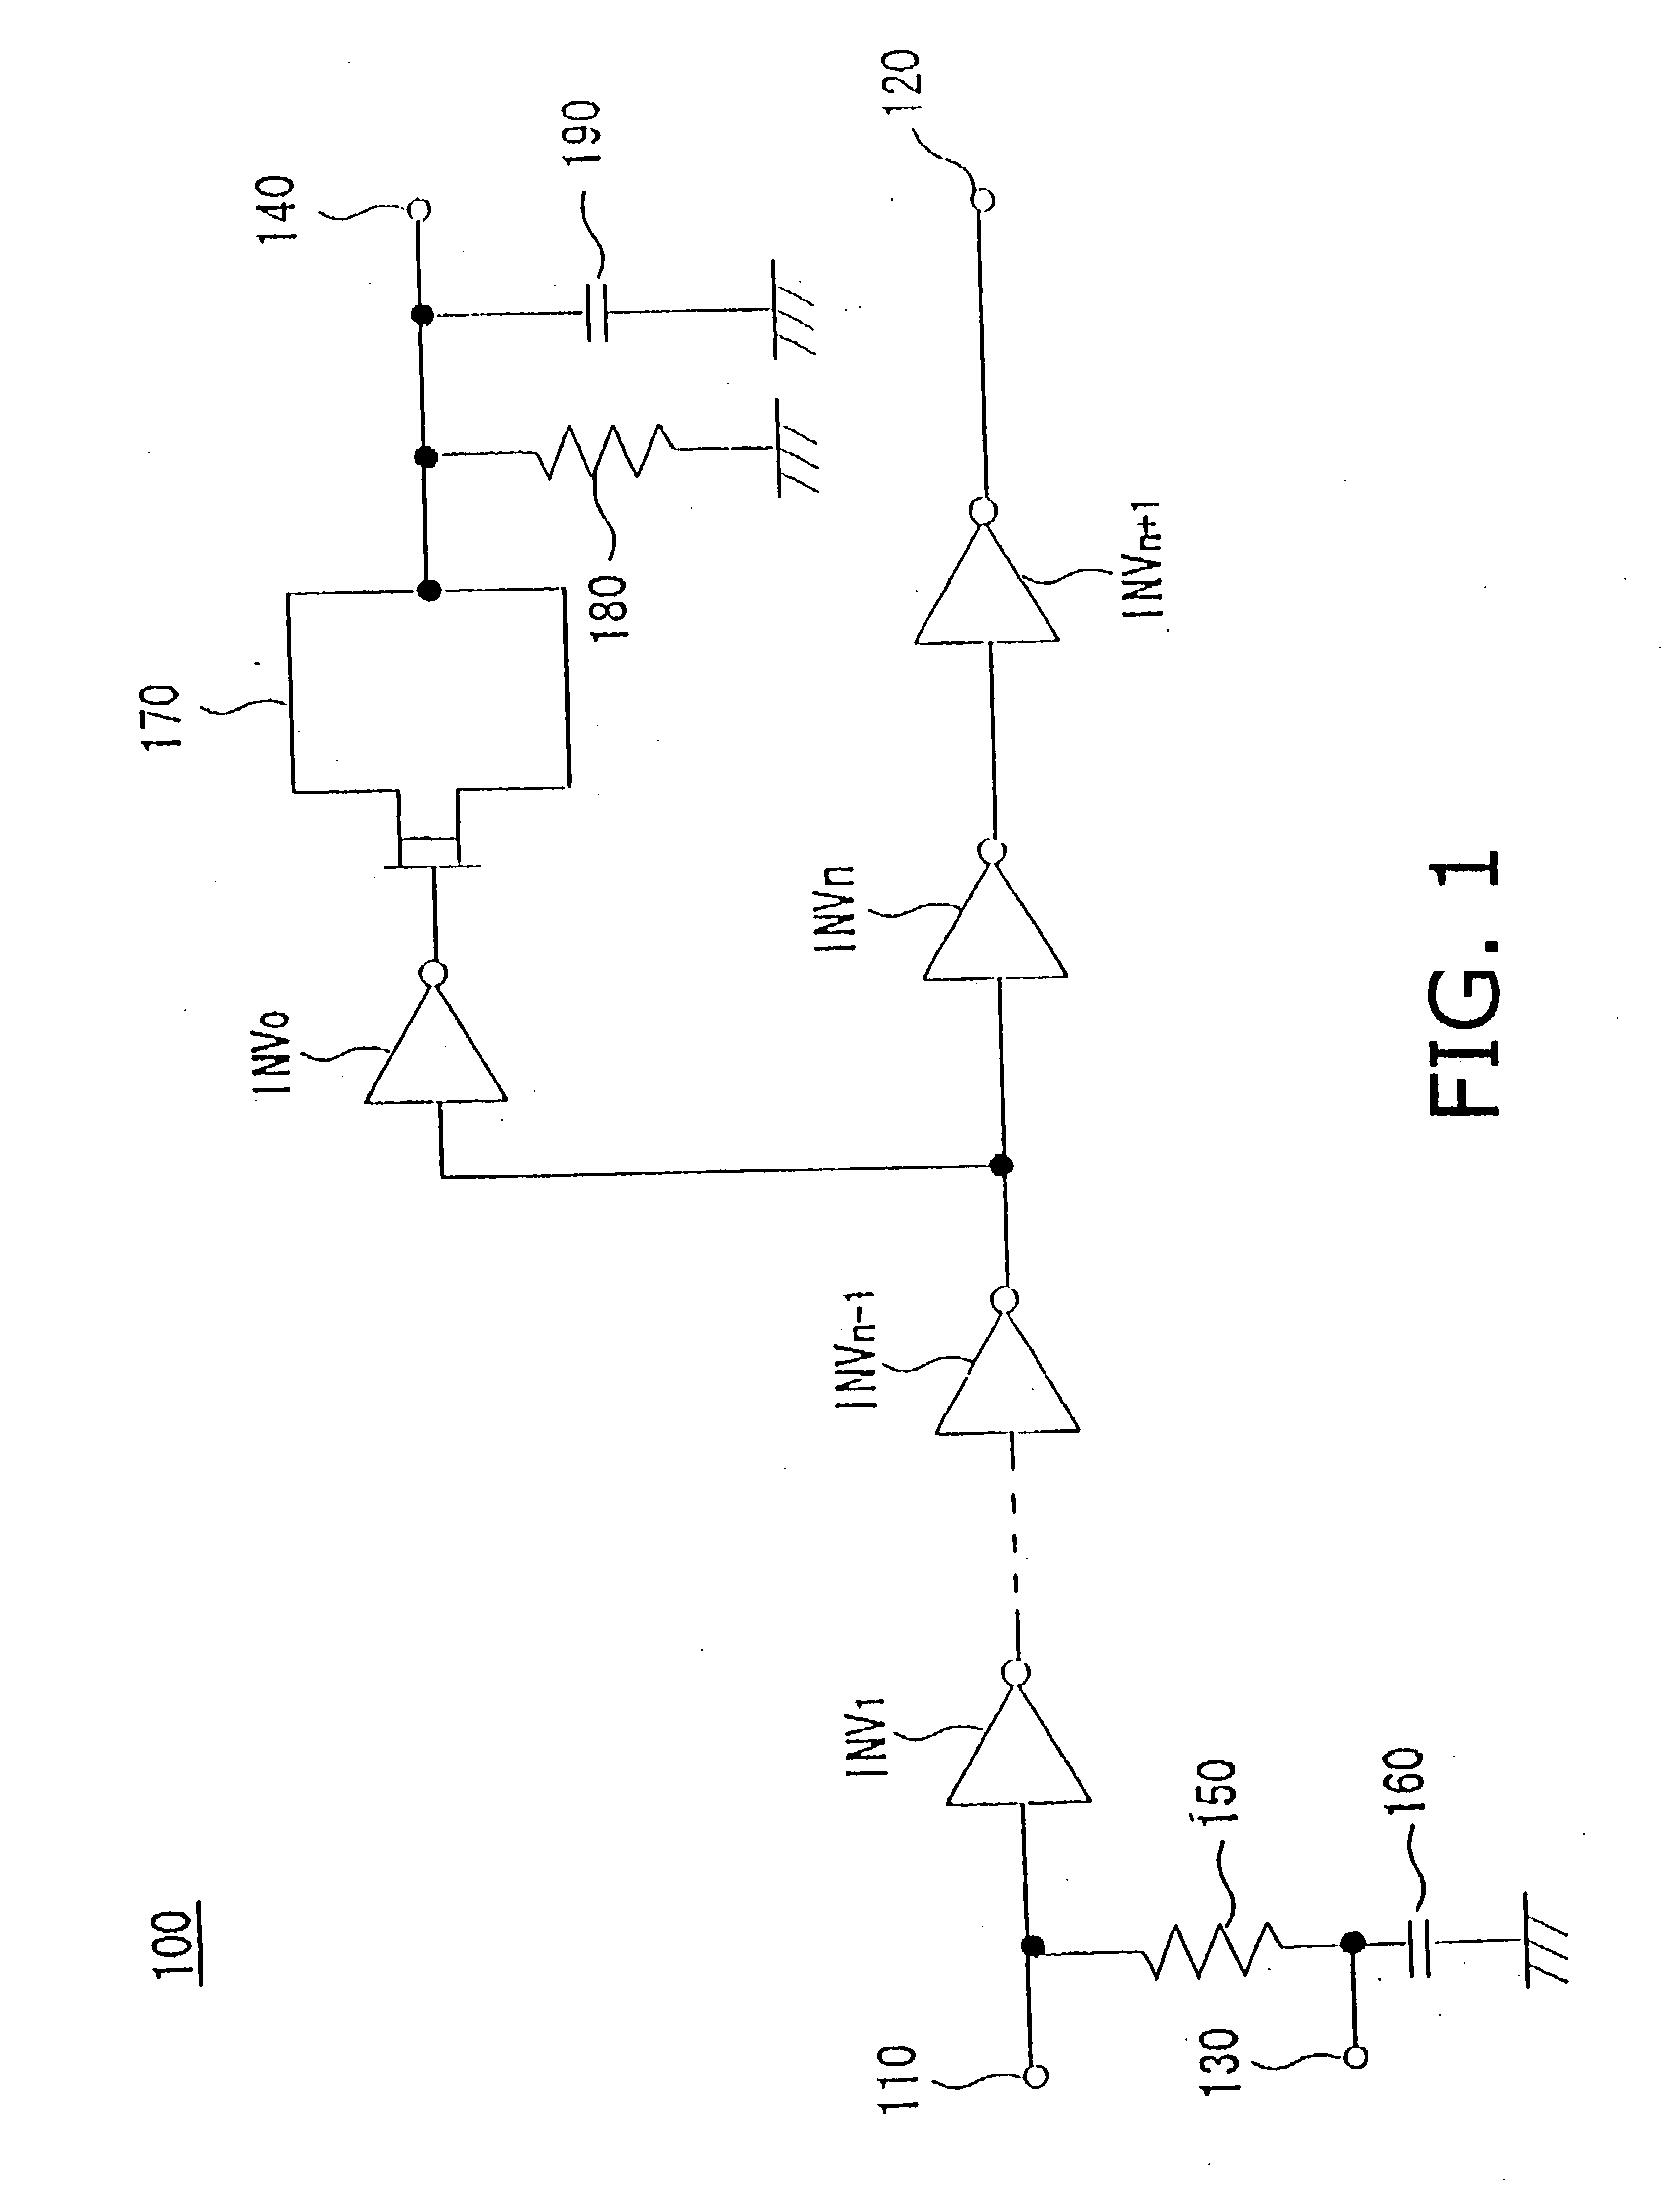 Limiting amplifier with a power detection circuit